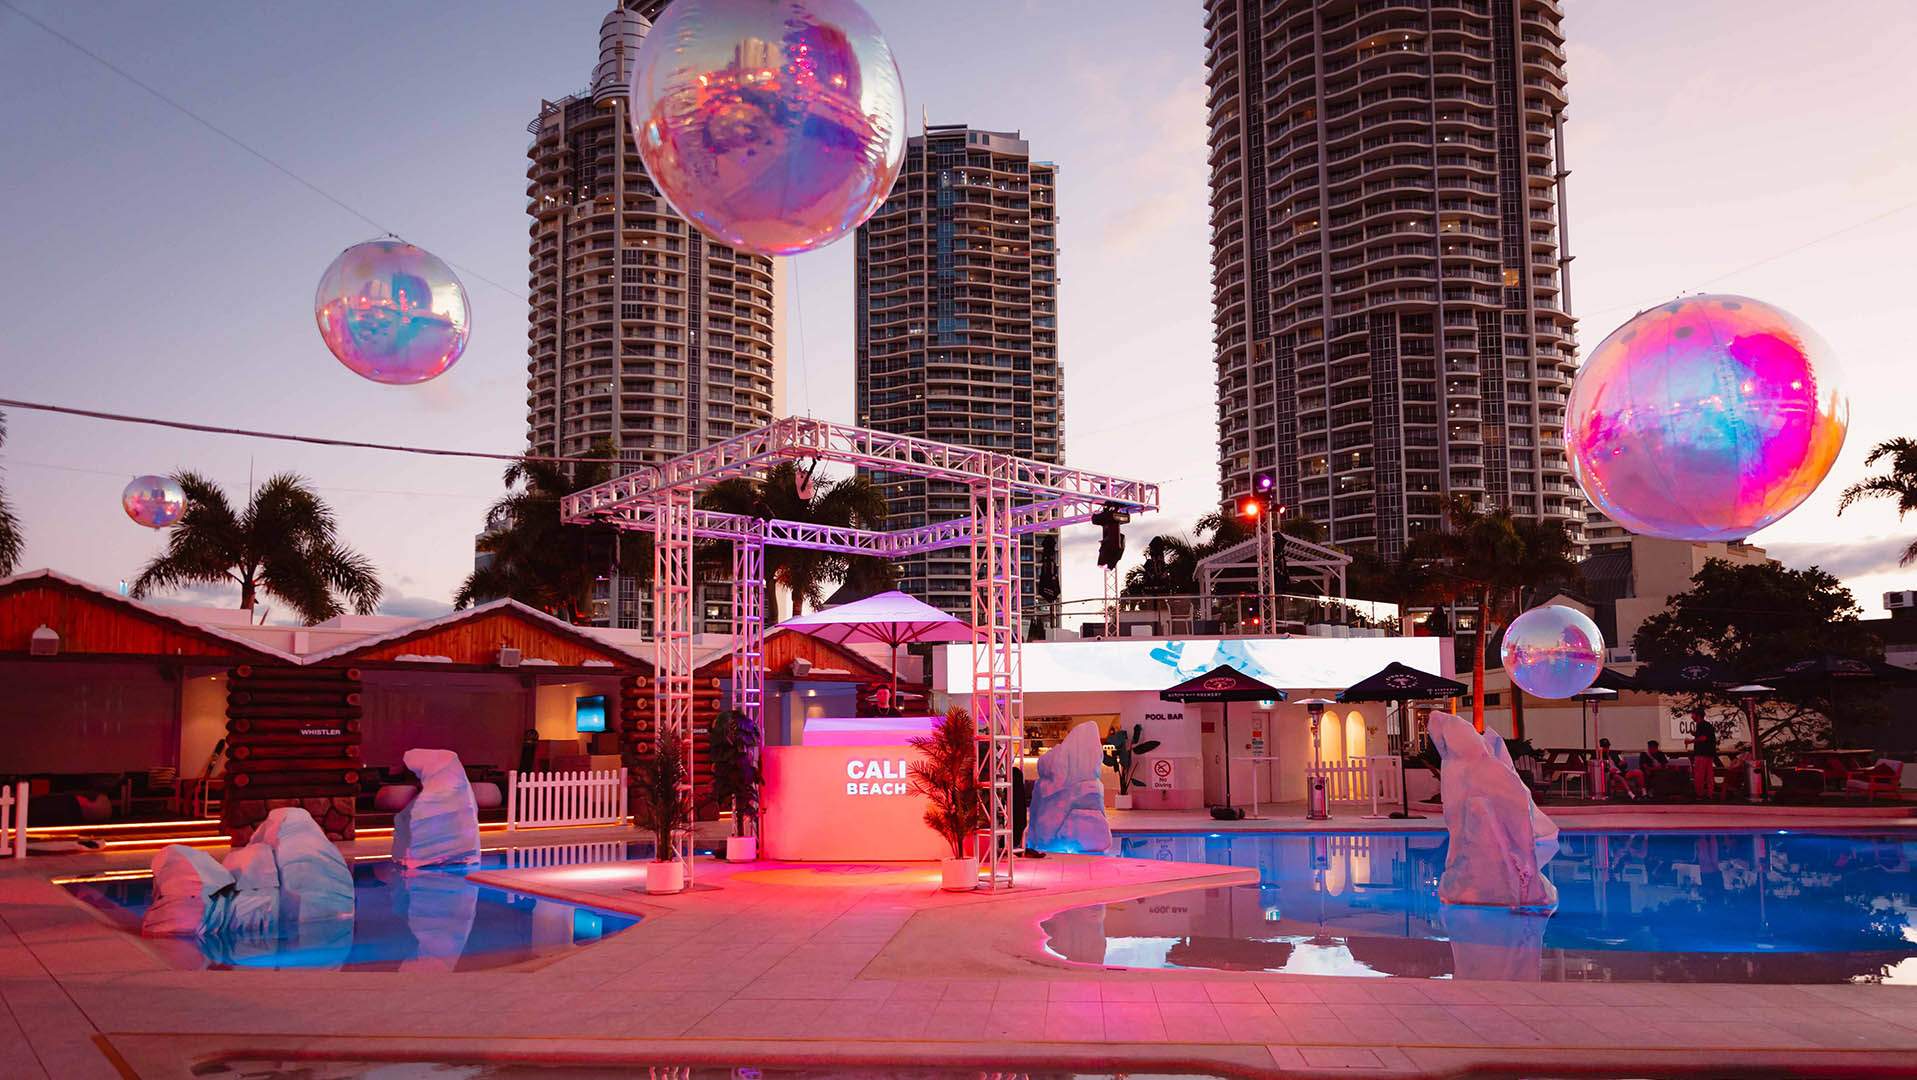 Now Open: Surfers Paradise's Rooftop Beach Club Has Transformed Into a Wintry Inflatable Nightclub Until Spring